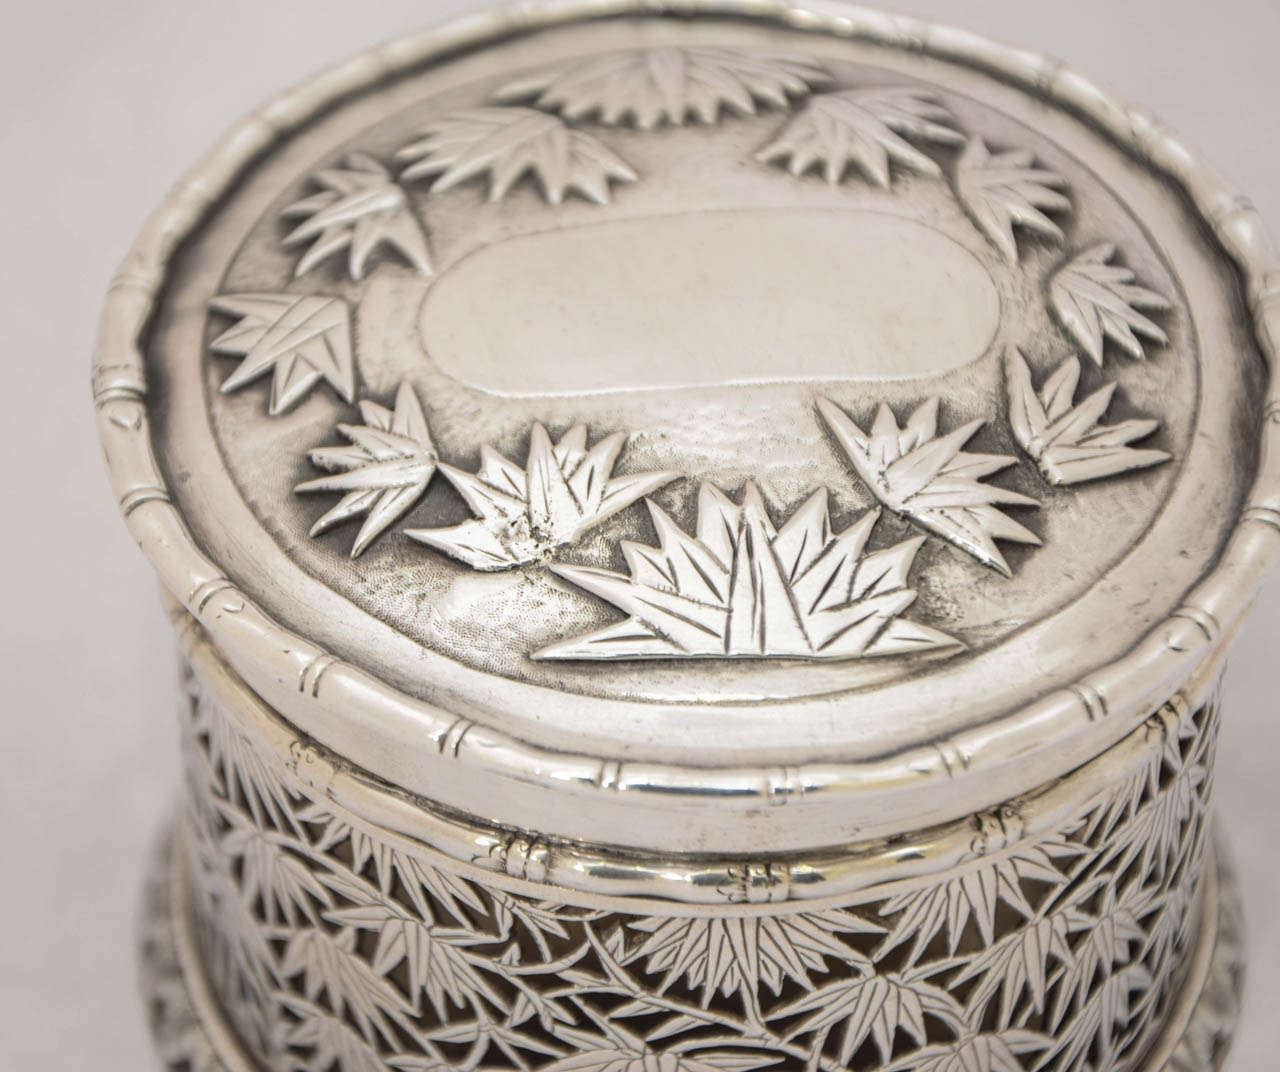 19th Century Chinese Export Silver Box